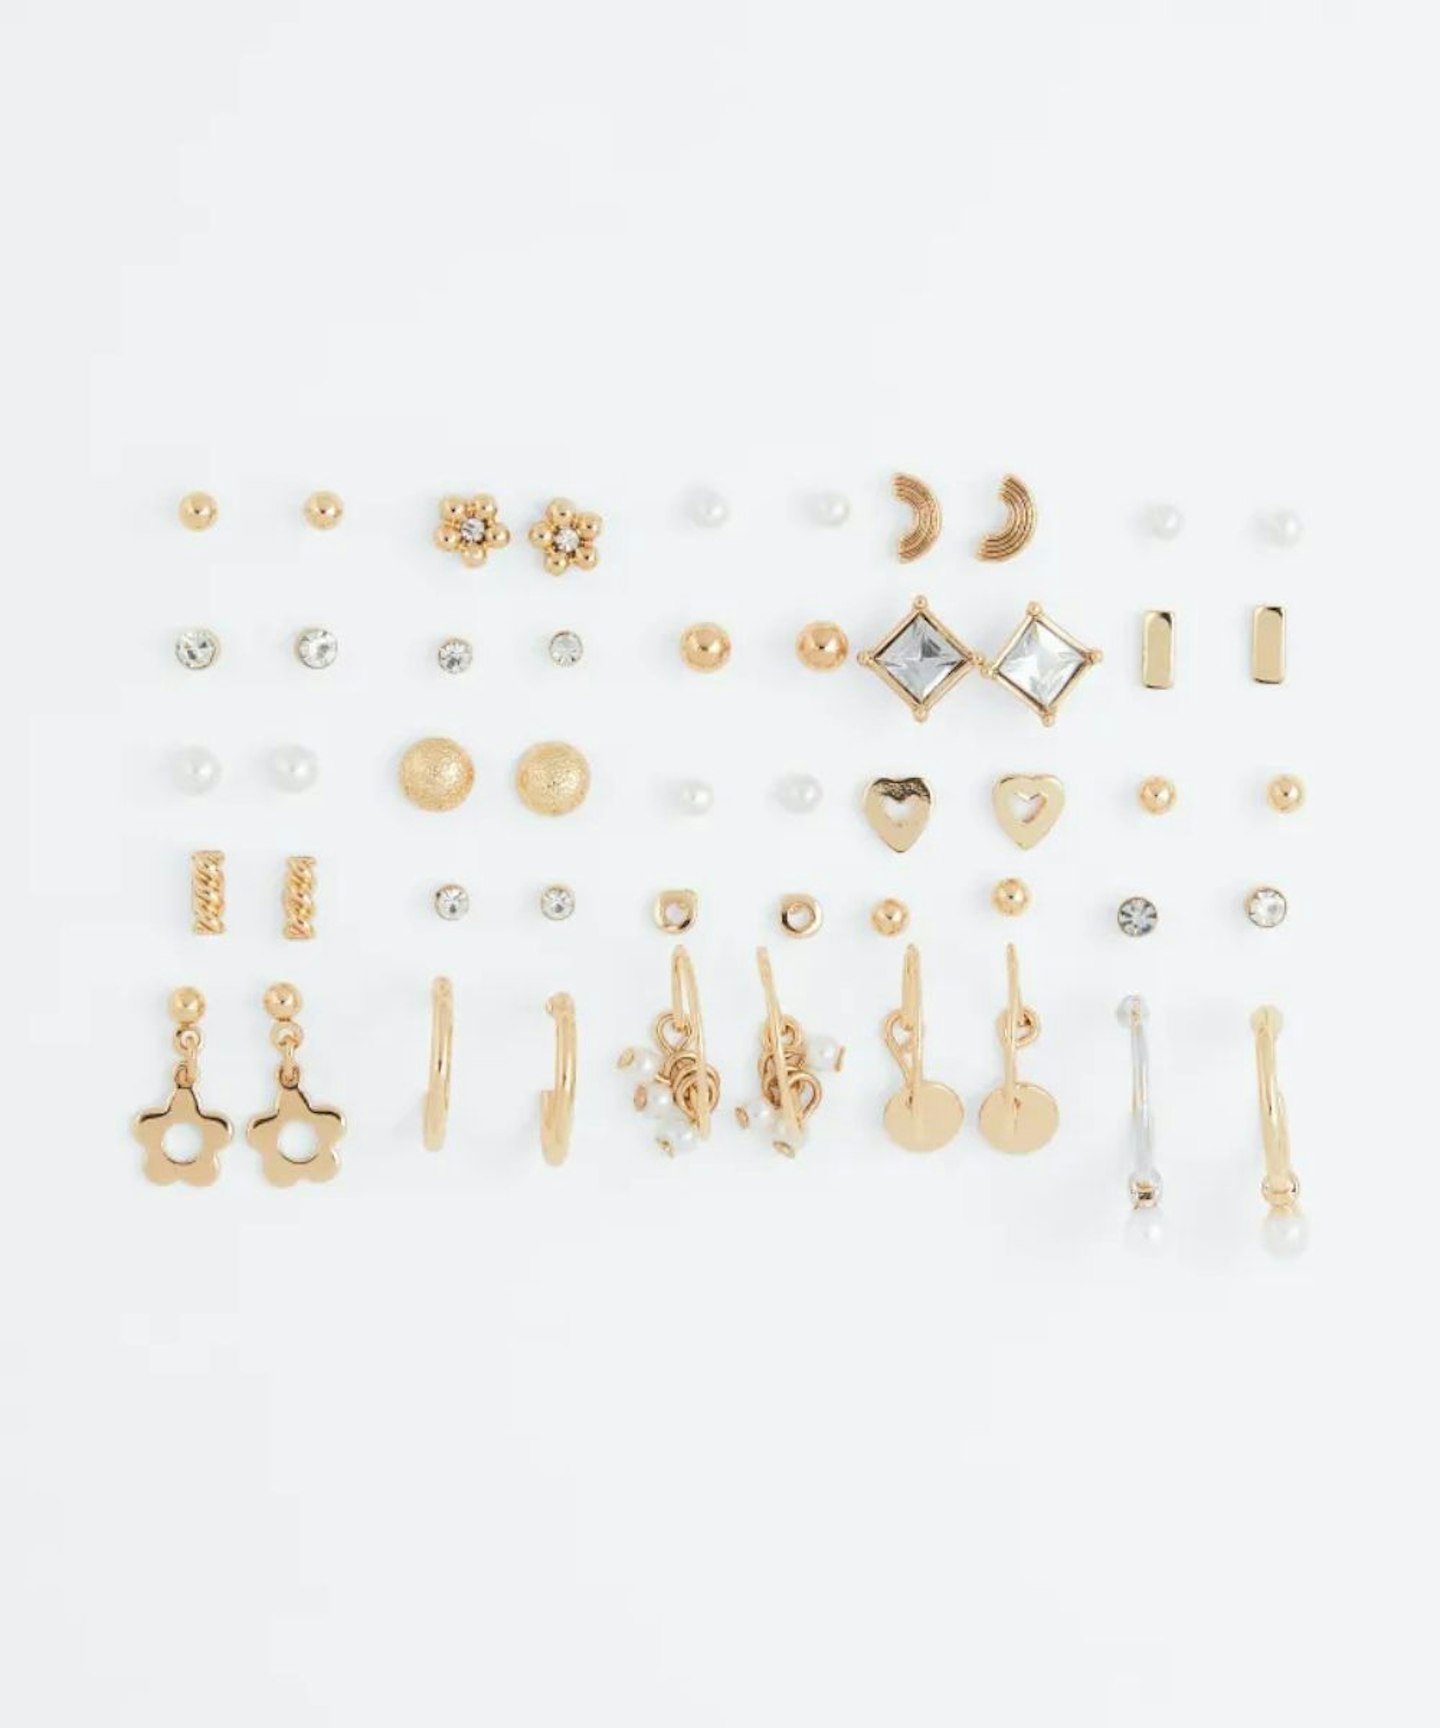 H&M 25 pairs earrings and studs